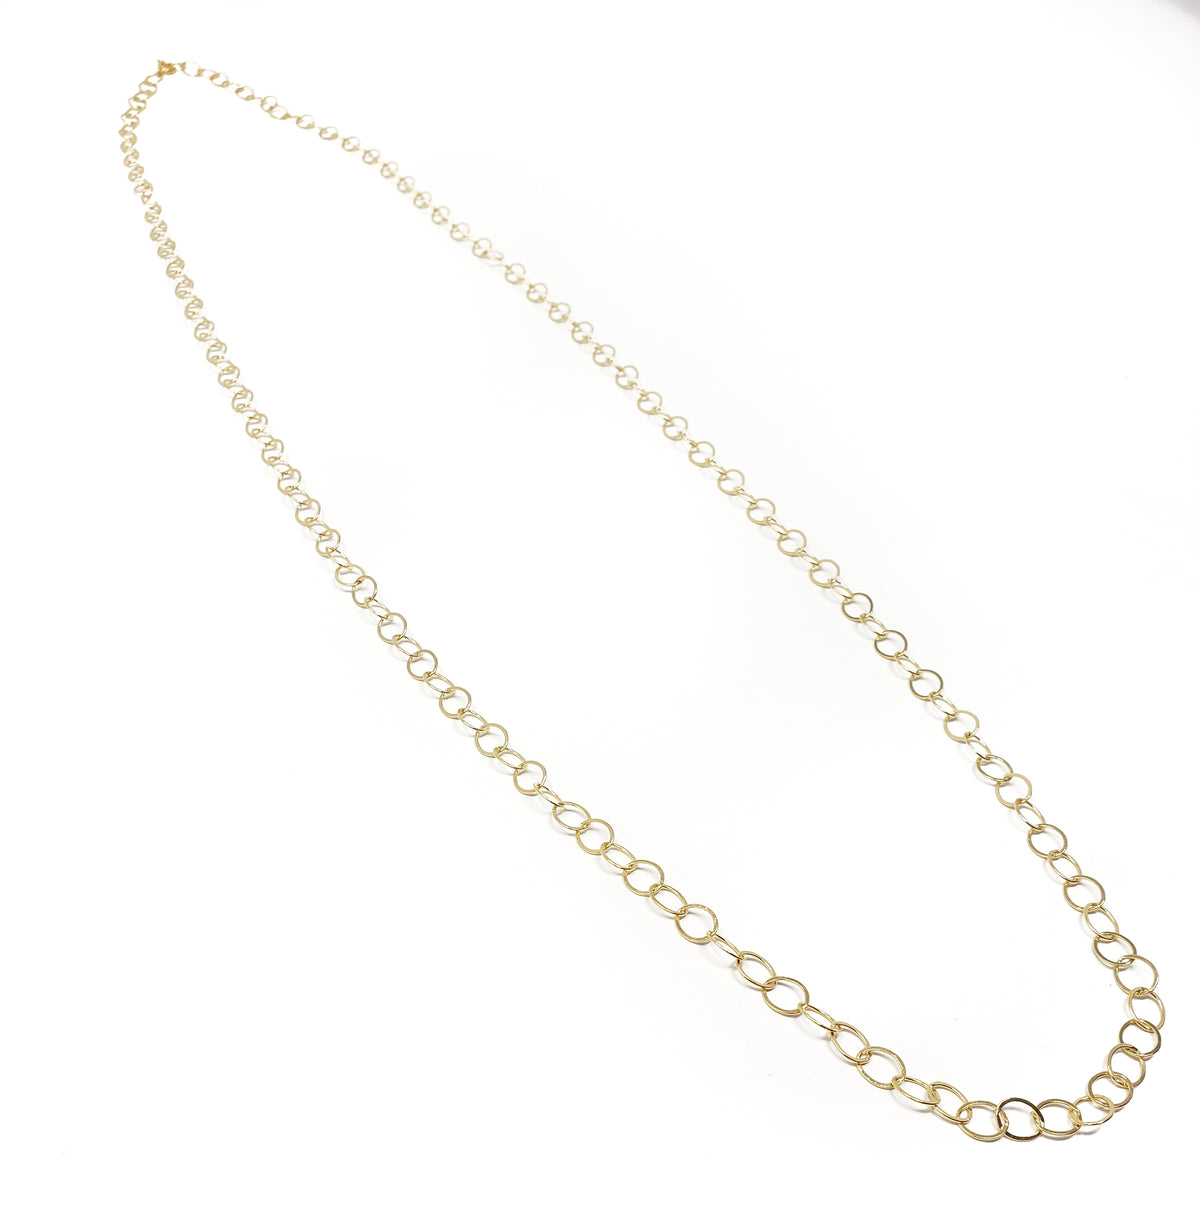 Classic Hammered Circle Necklace